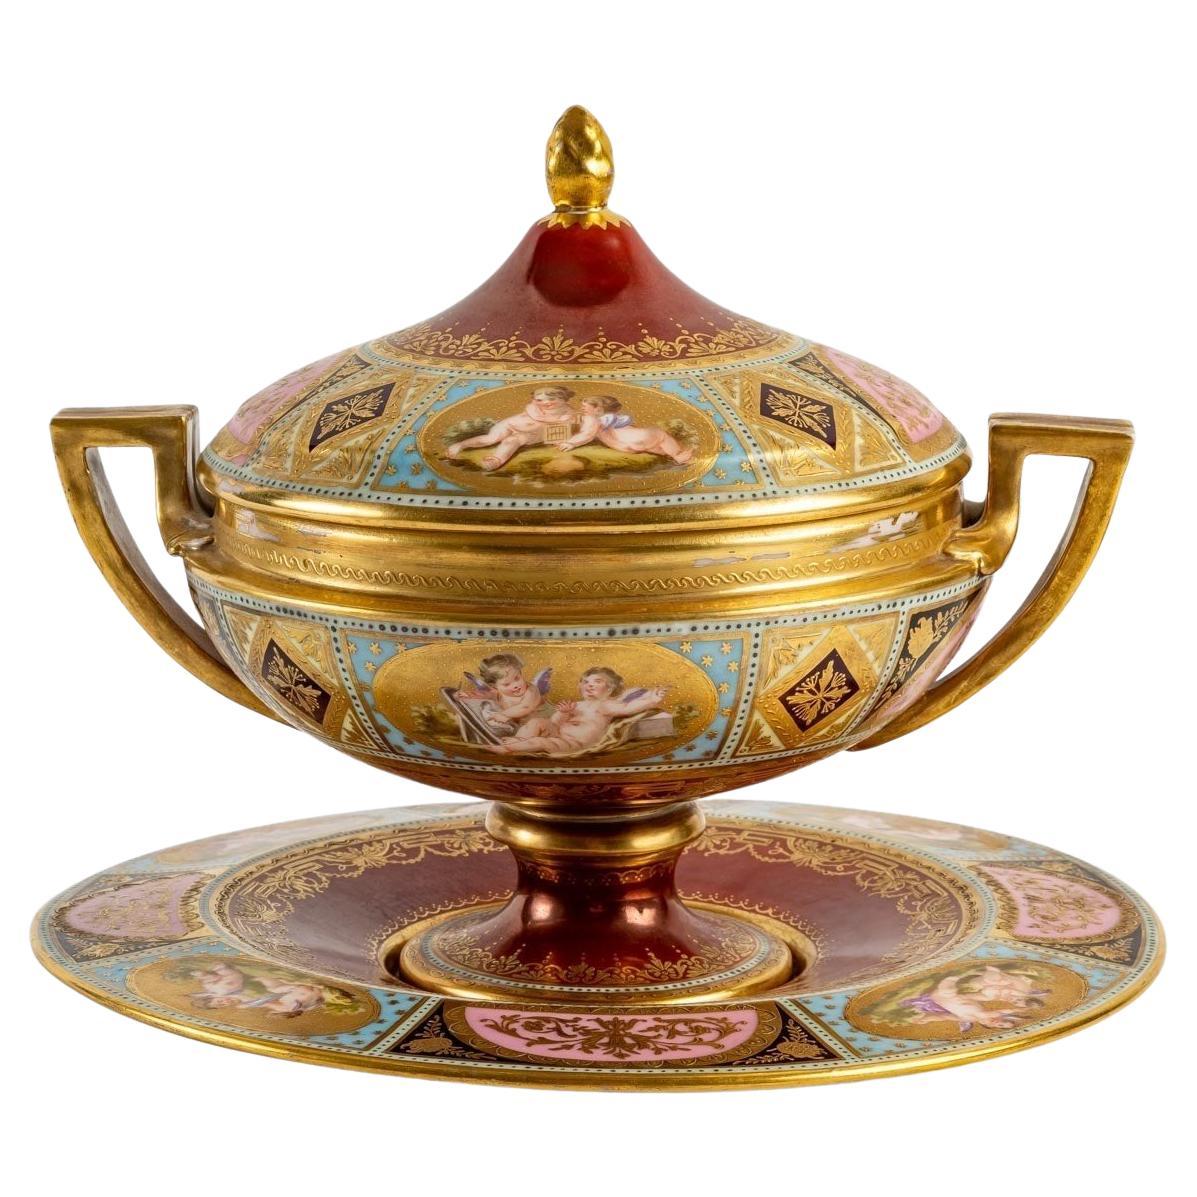 Covered Bowl, Rich Enameled Decoration, 19th Century